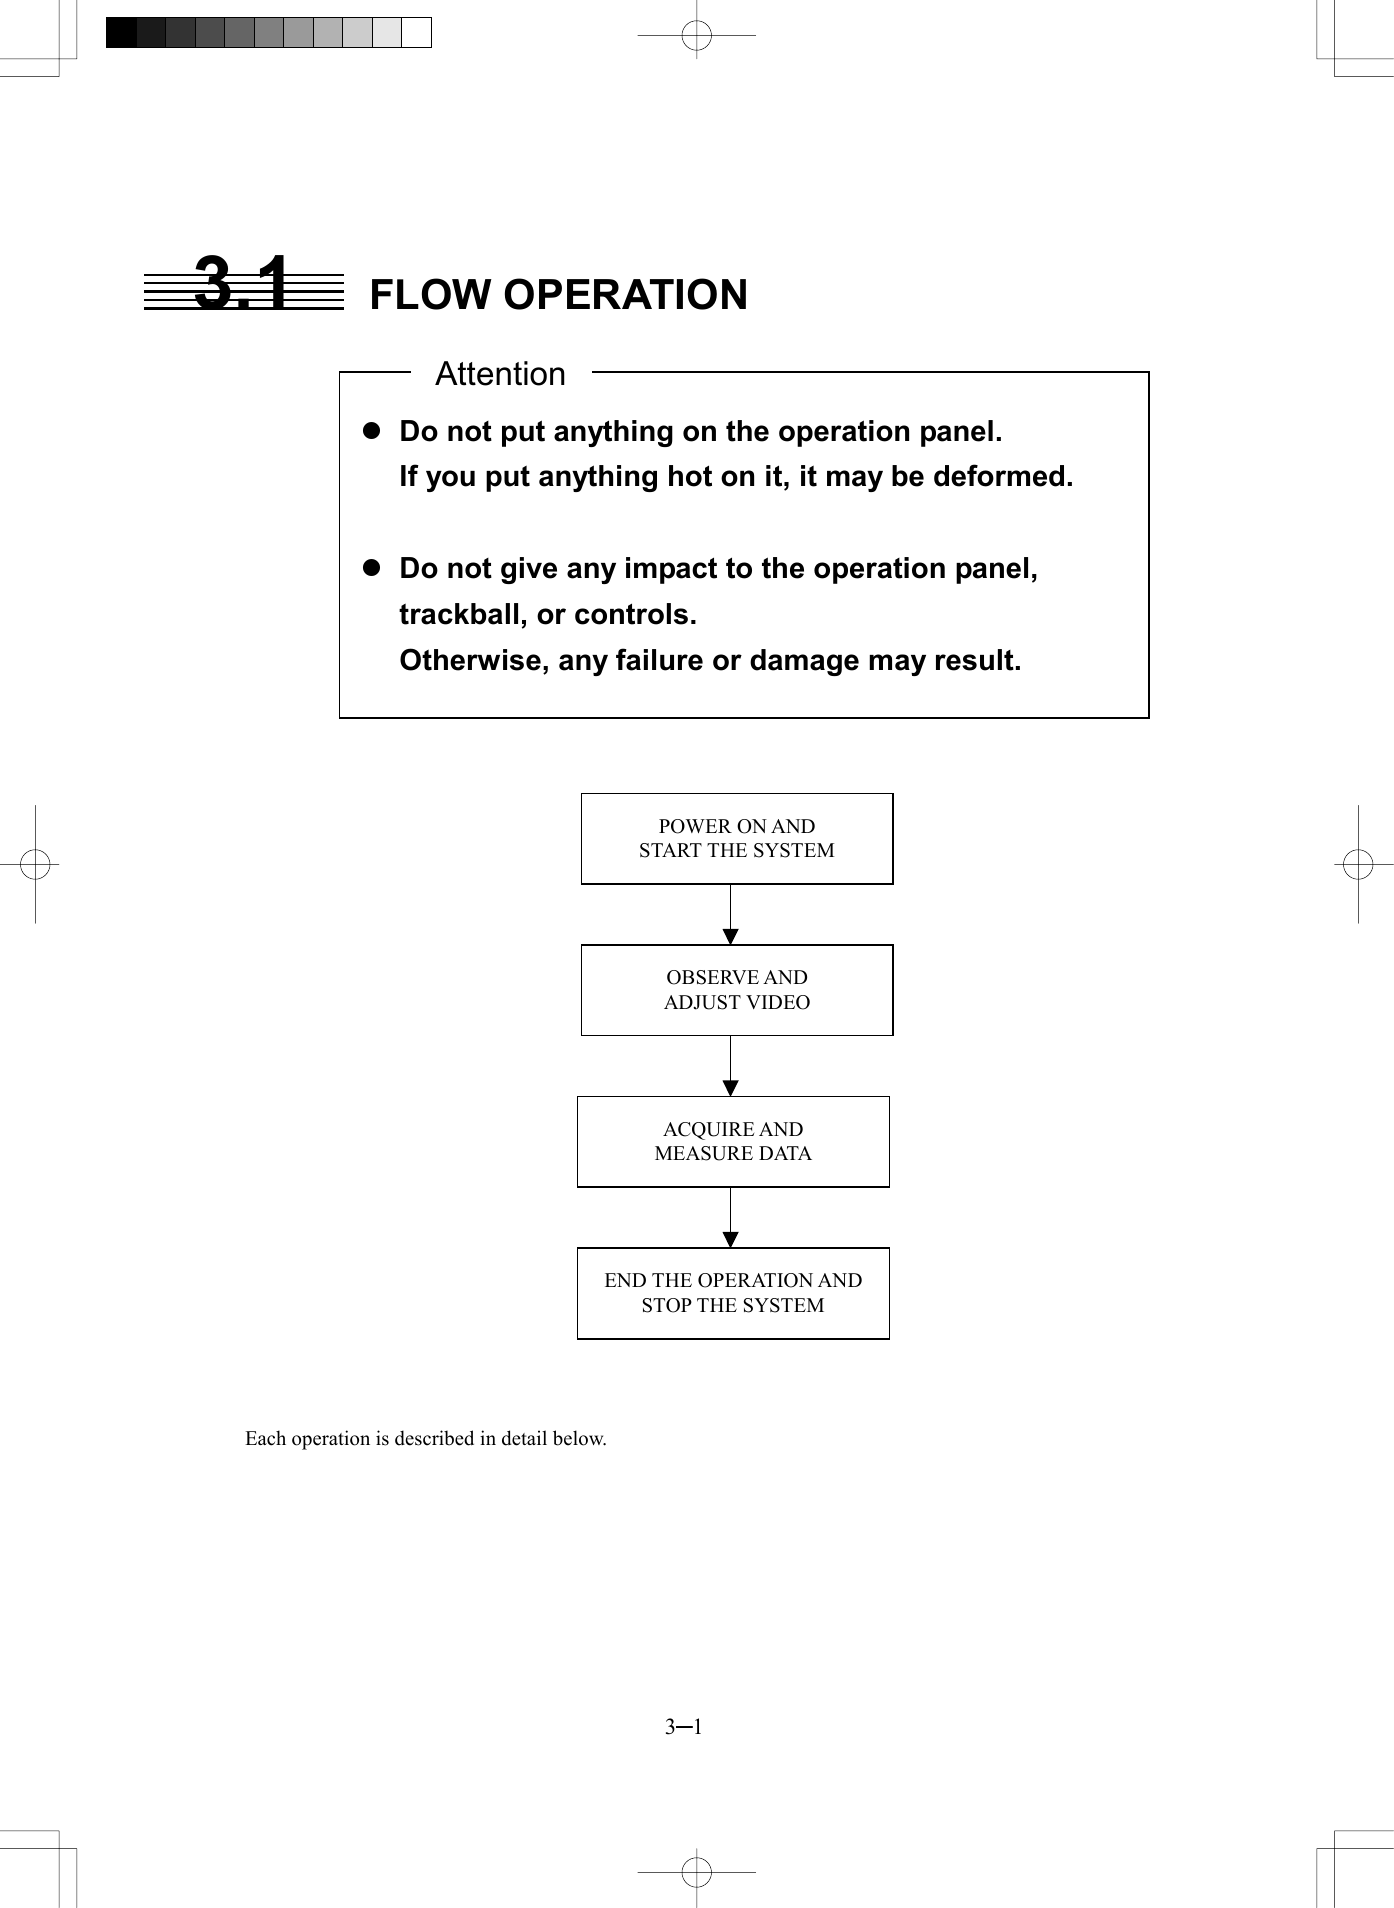  3─1  3.1 FLOW OPERATION                                         Each operation is described in detail below.     l Do not put anything on the operation panel. If you put anything hot on it, it may be deformed.  l Do not give any impact to the operation panel, trackball, or controls. Otherwise, any failure or damage may result. AttentionPOWER ON AND START THE SYSTEM OBSERVE AND   ADJUST VIDEO ACQUIRE AND   MEASURE DATA END THE OPERATION AND STOP THE SYSTEM 